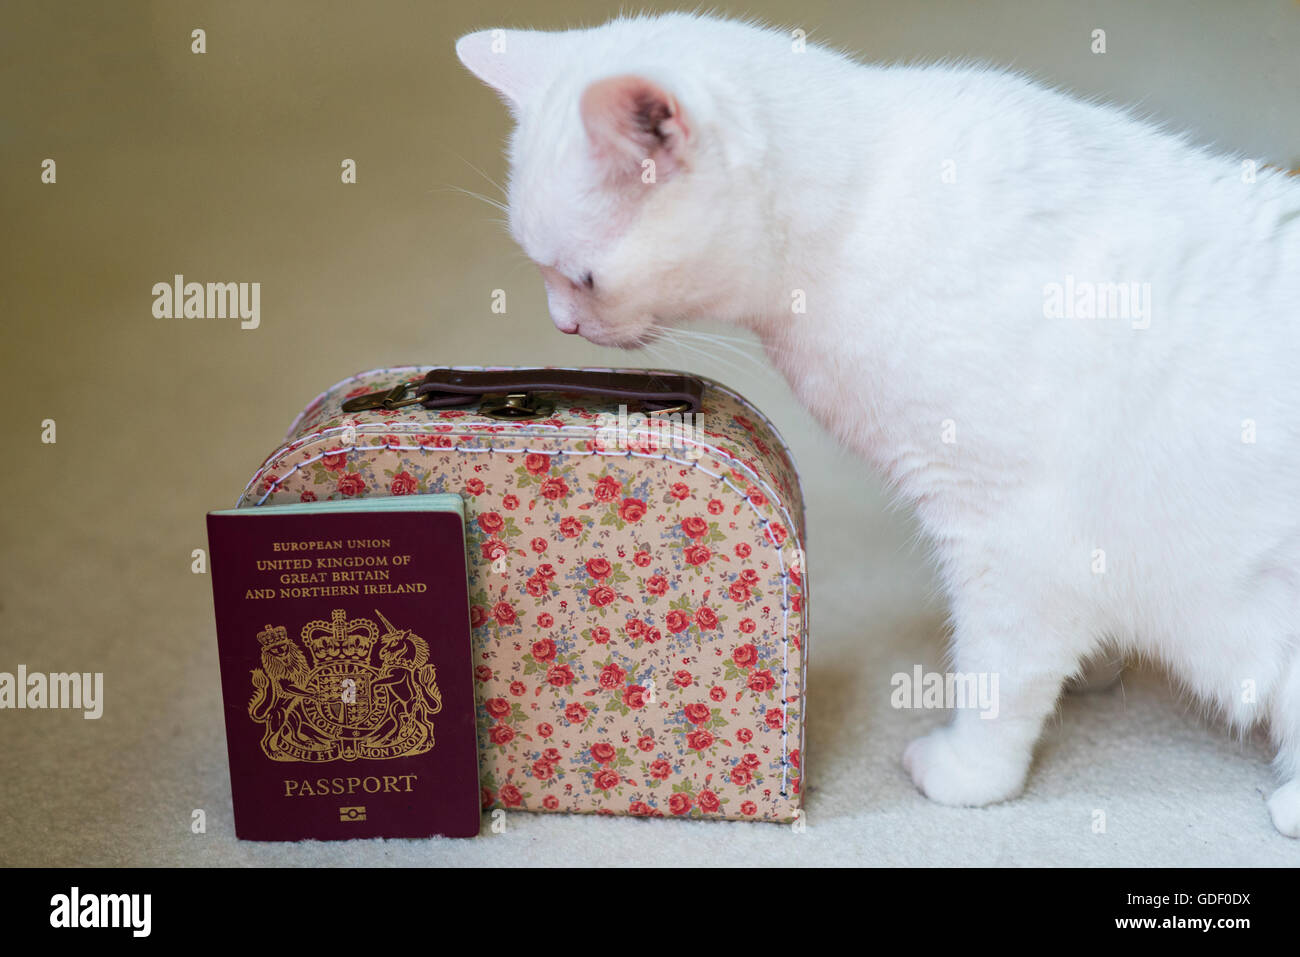 A white cat sitting next to a passport and suitcase Stock Photo